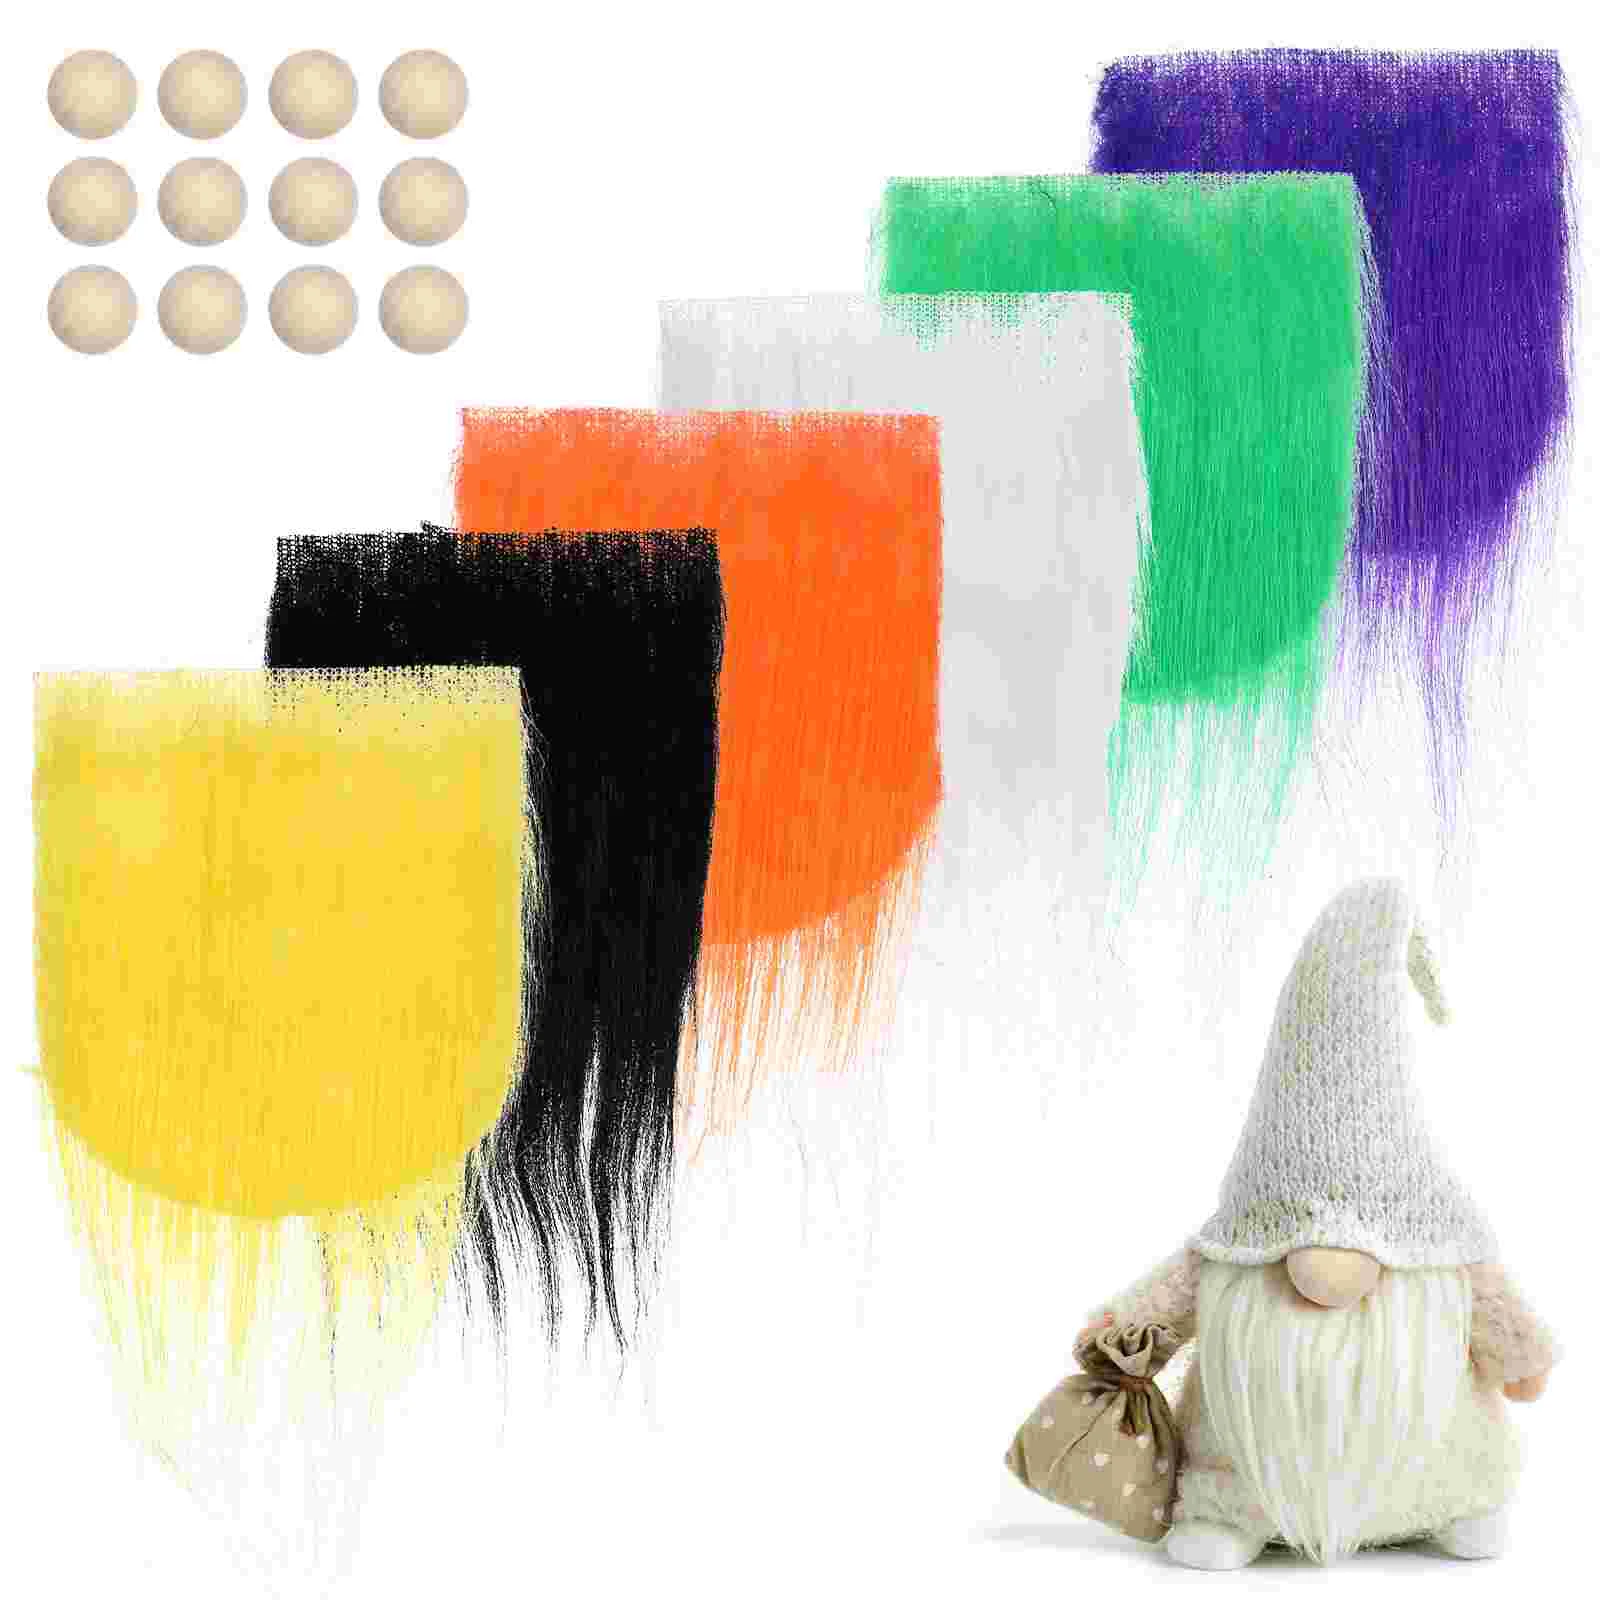 

24 Pcs Gnome Beards and Unfinished Wooden Balls for DIY Making Gnome Dolls